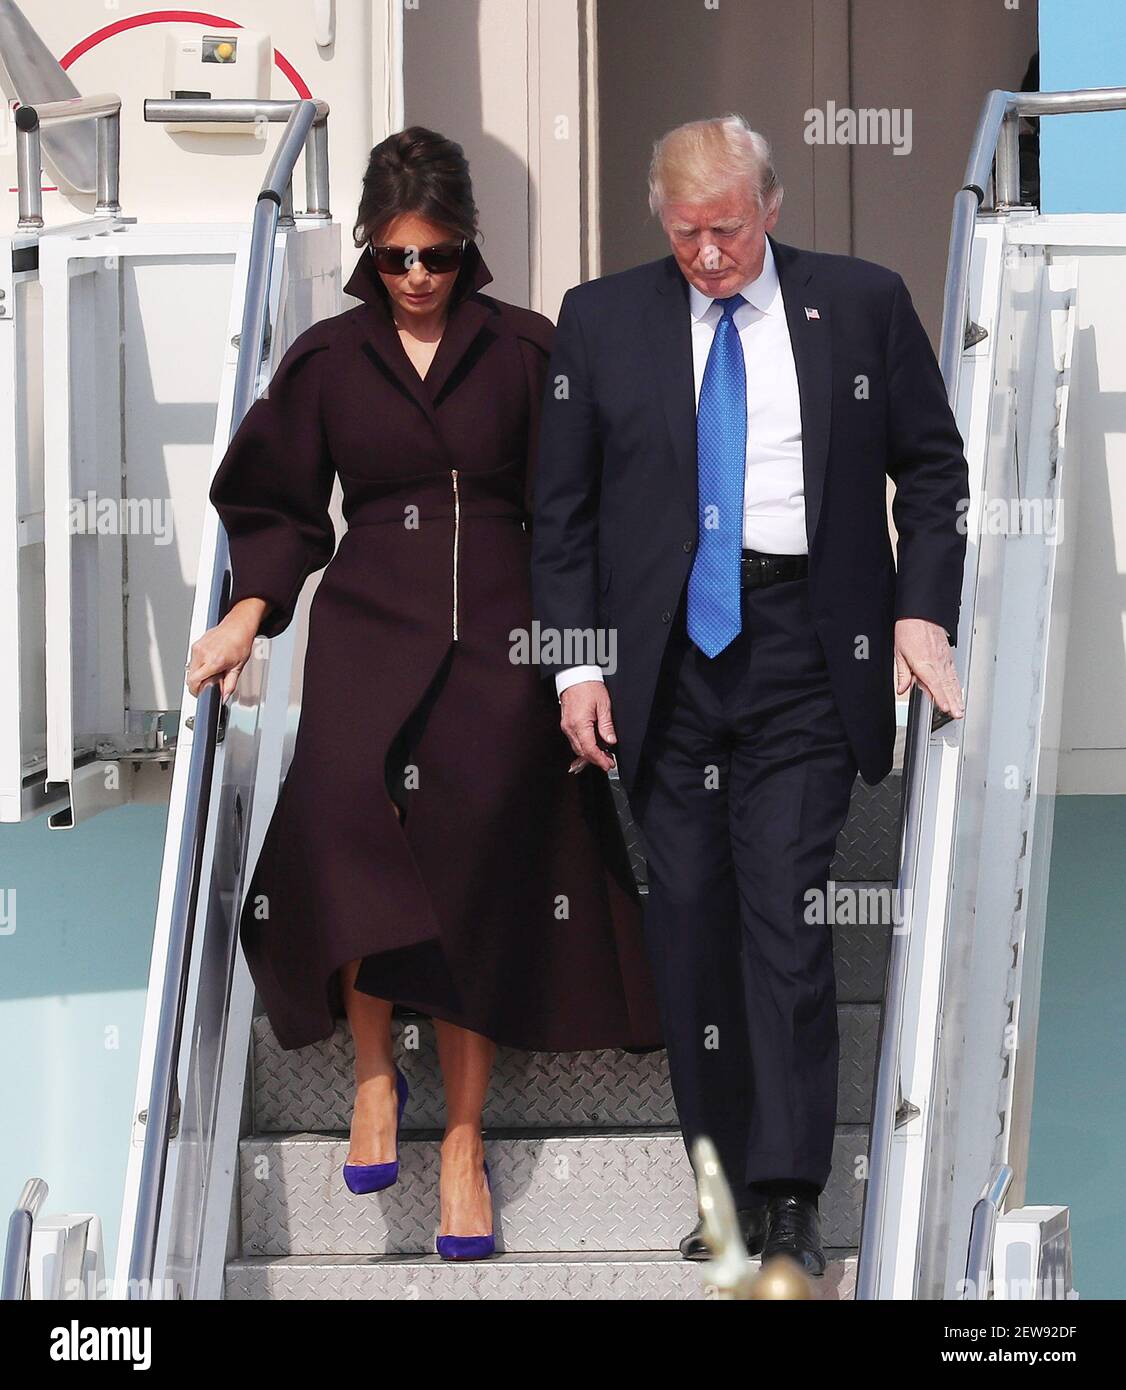 7 November 2017 - Osan, South Korea : U.S. President Donald Trump, (right),  and first lady Melania Trump, wave on their arrival at the U.S. Osan  Military Air Base in Osan, South